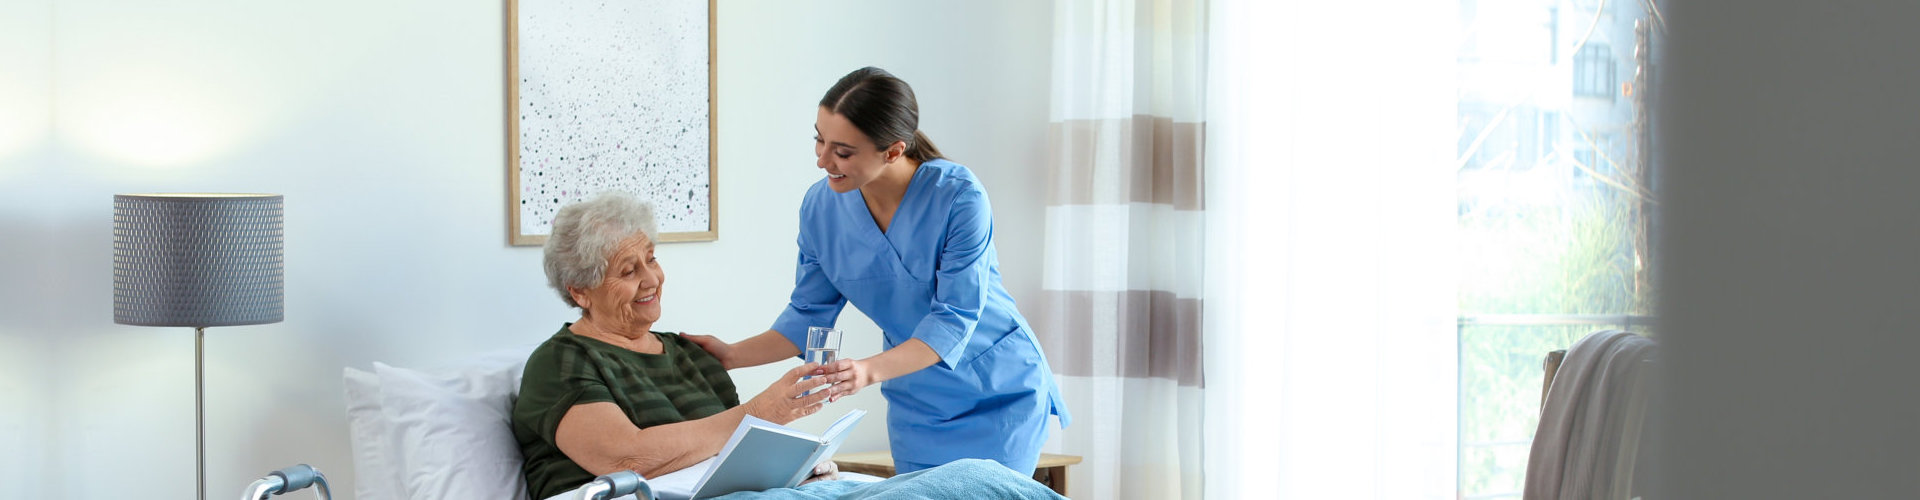 caregiver serving a glass of water to her patient